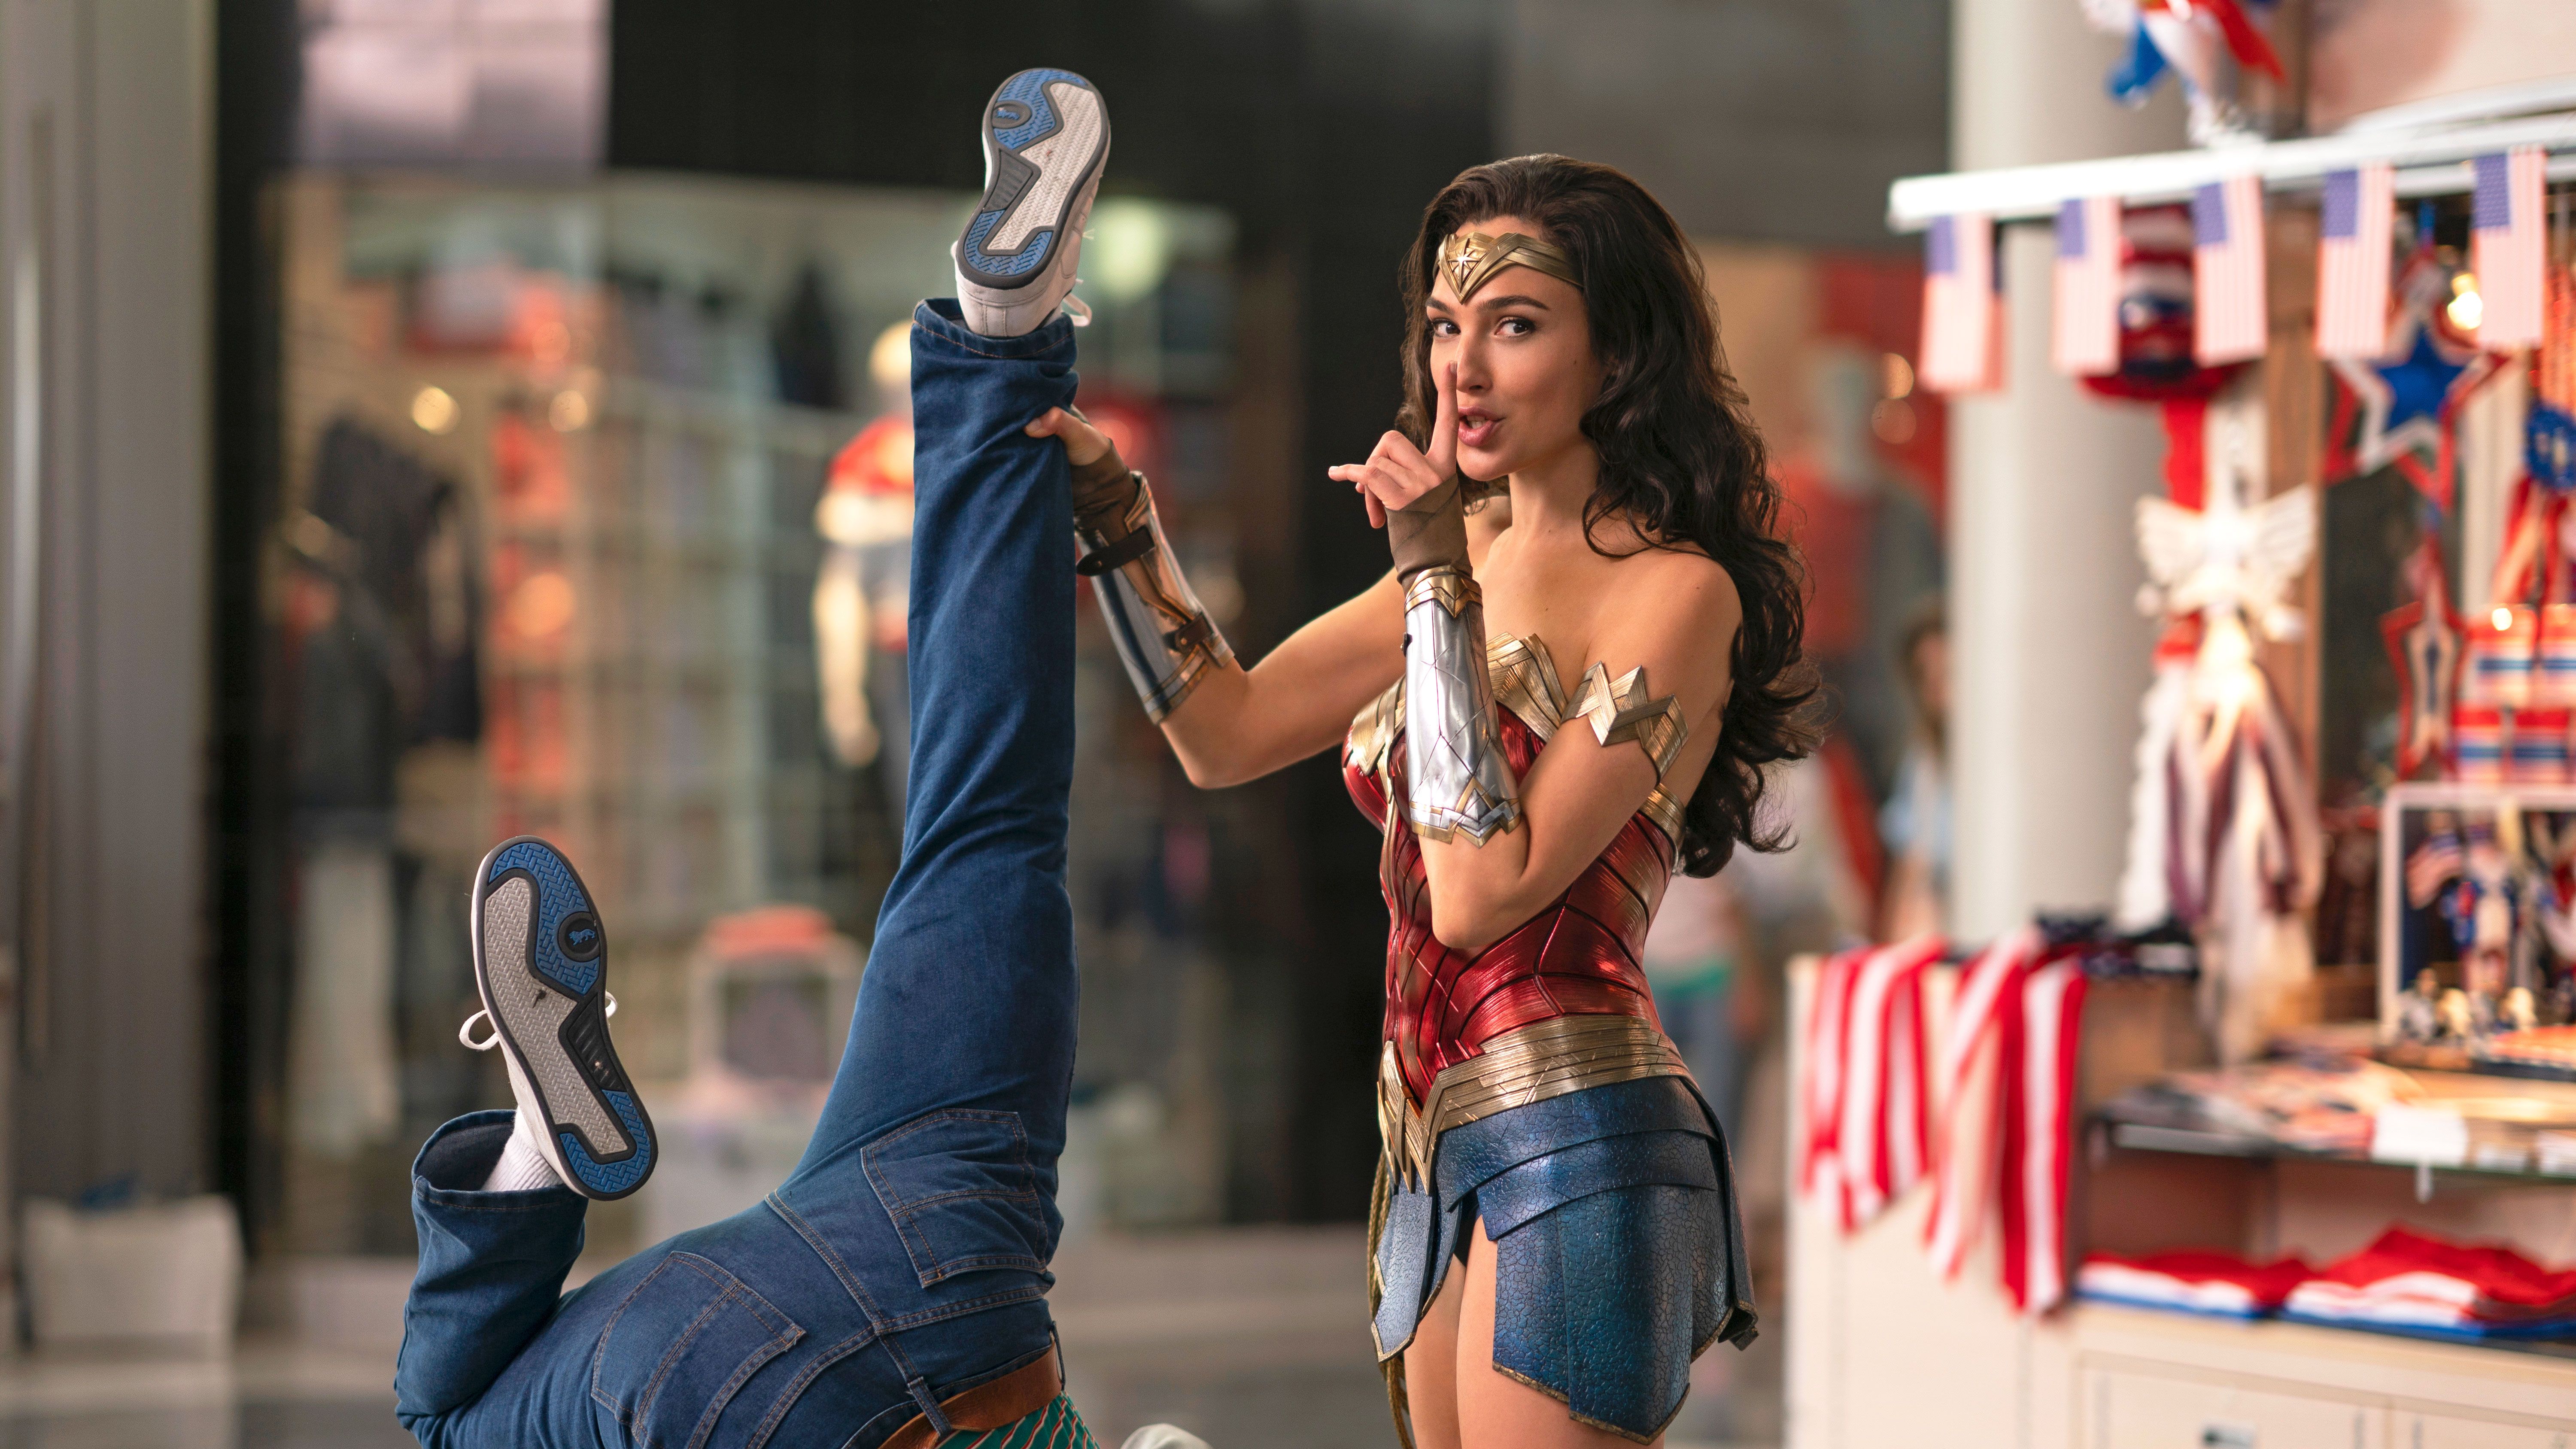 Wonder Woman Cosplay Porn Tumblr - Wonder Woman 2 Facts | Movie Sequel Release Date, Cast, Spoilers